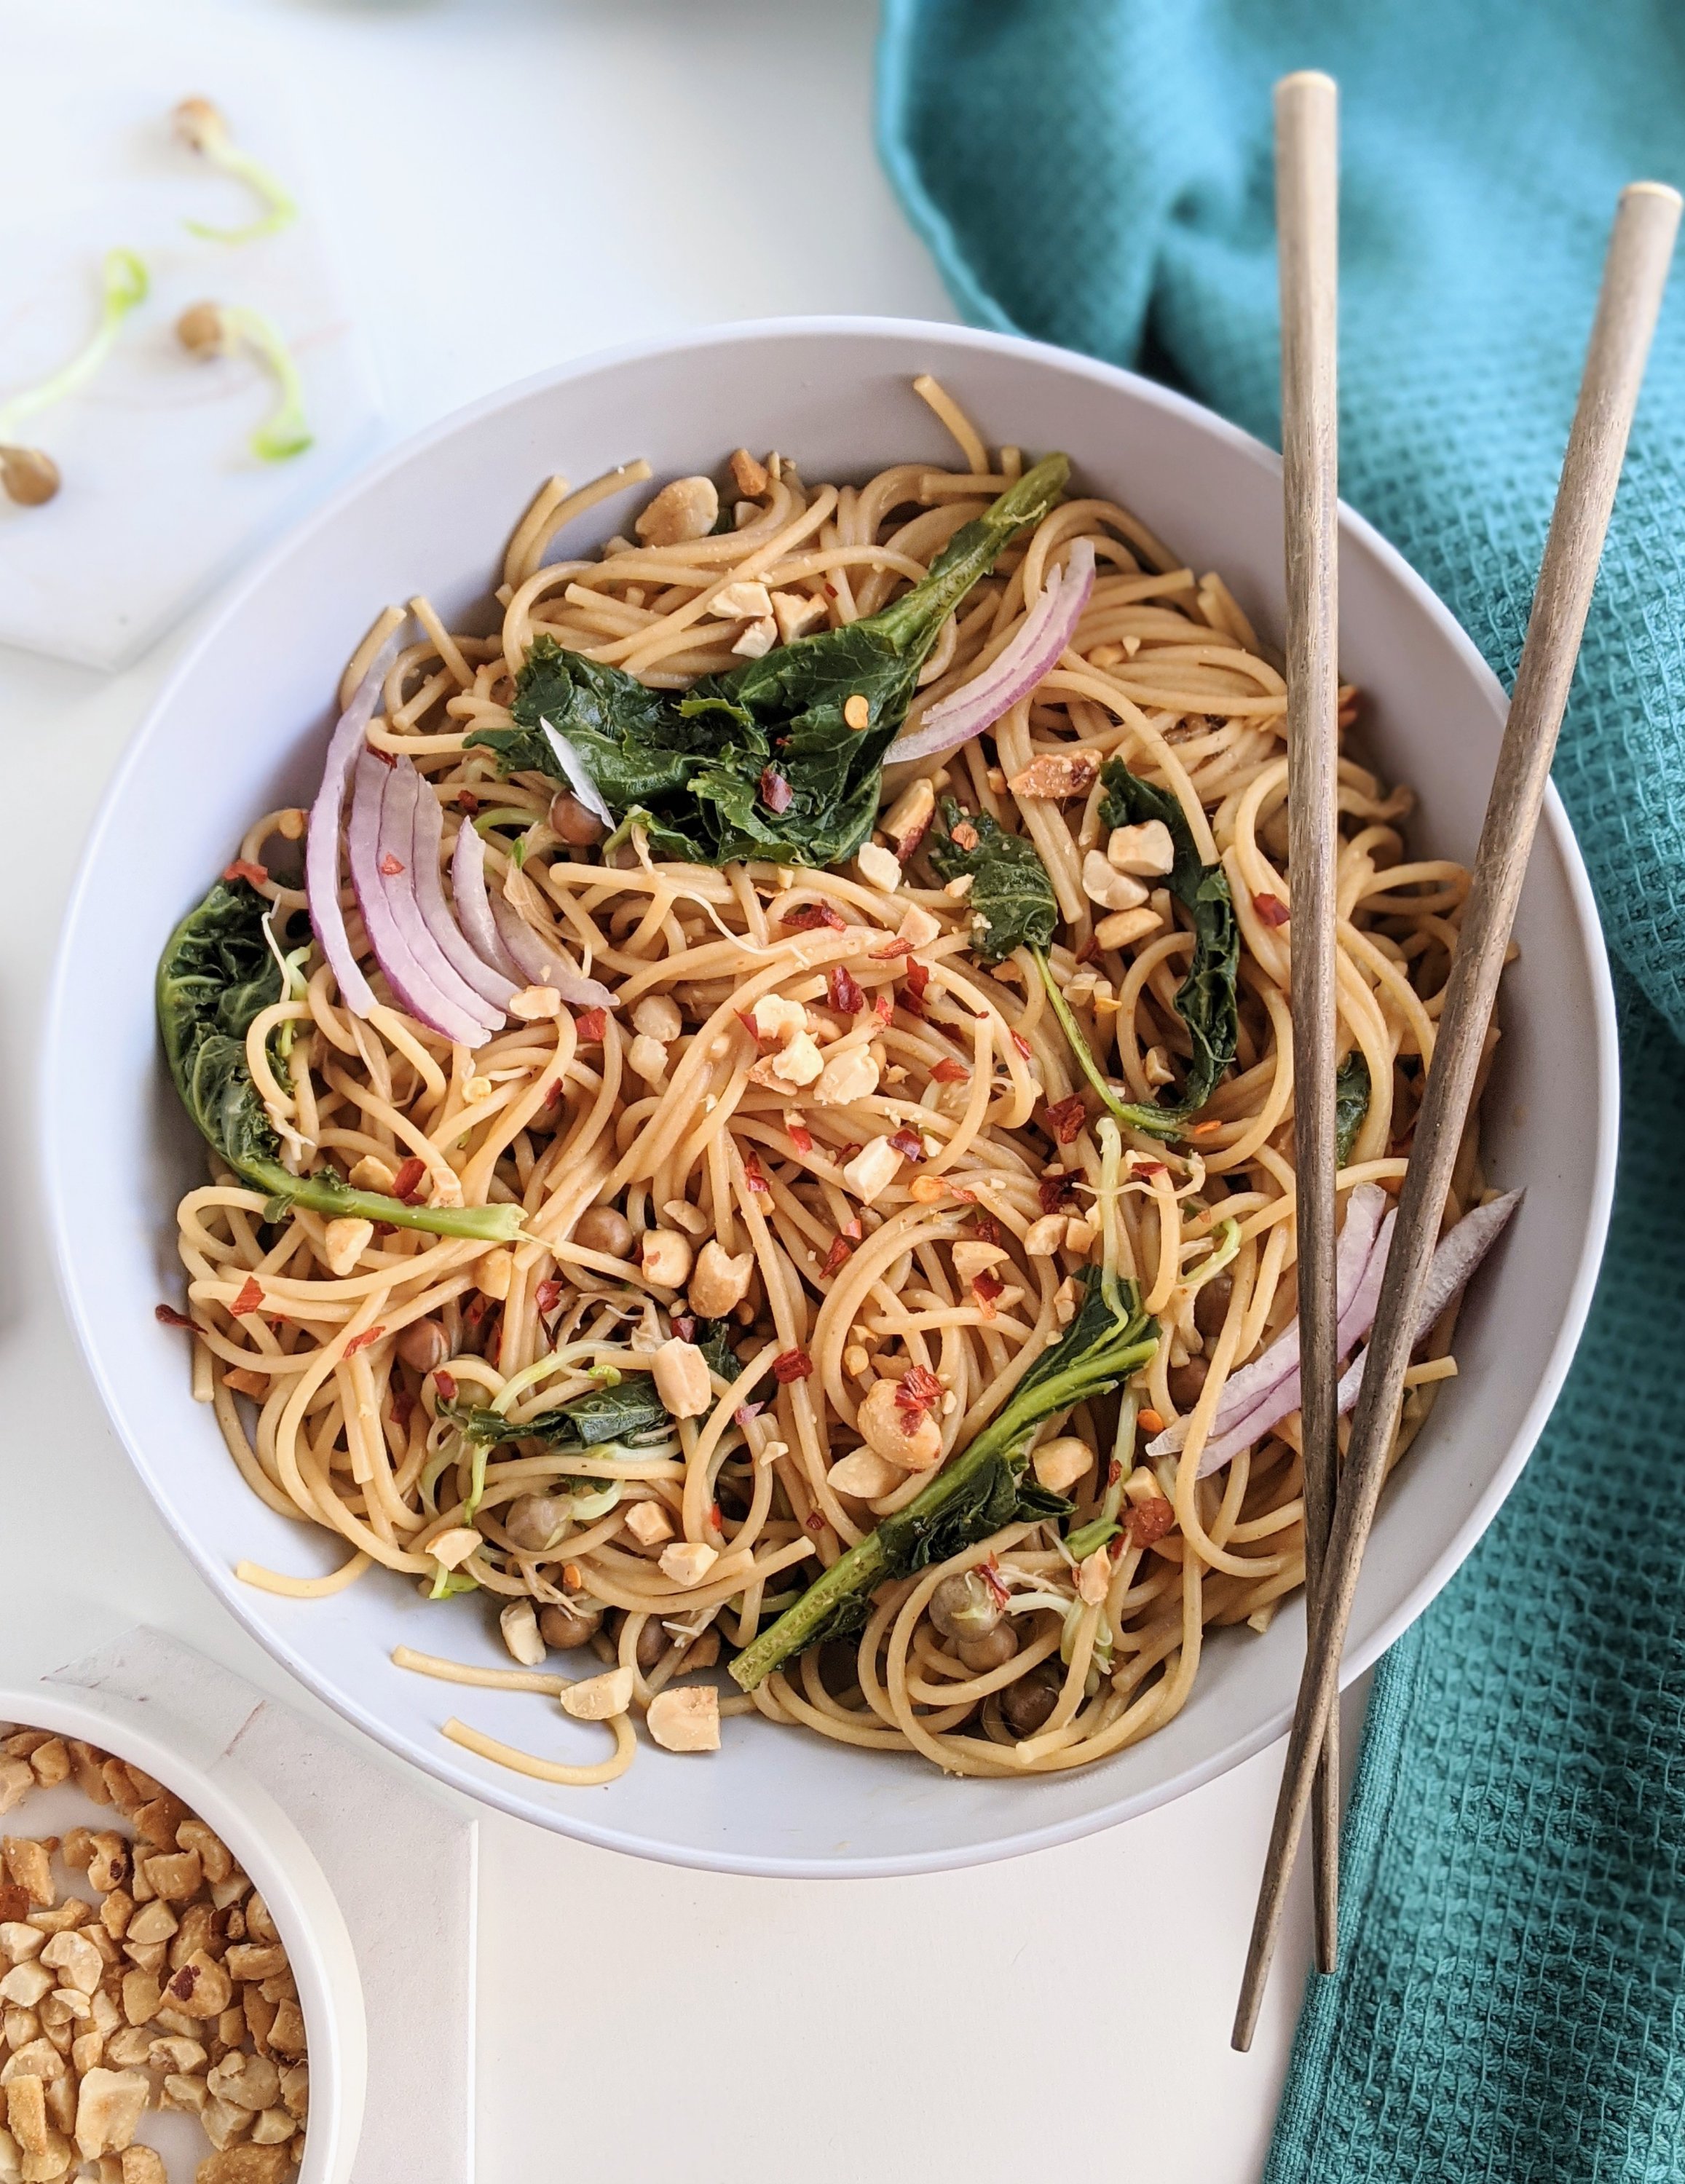 vegan peanut noodles recipe creamy healthy high protein vegetables asian inspired easy weeknight meal dinner lunch 15 minute recipe